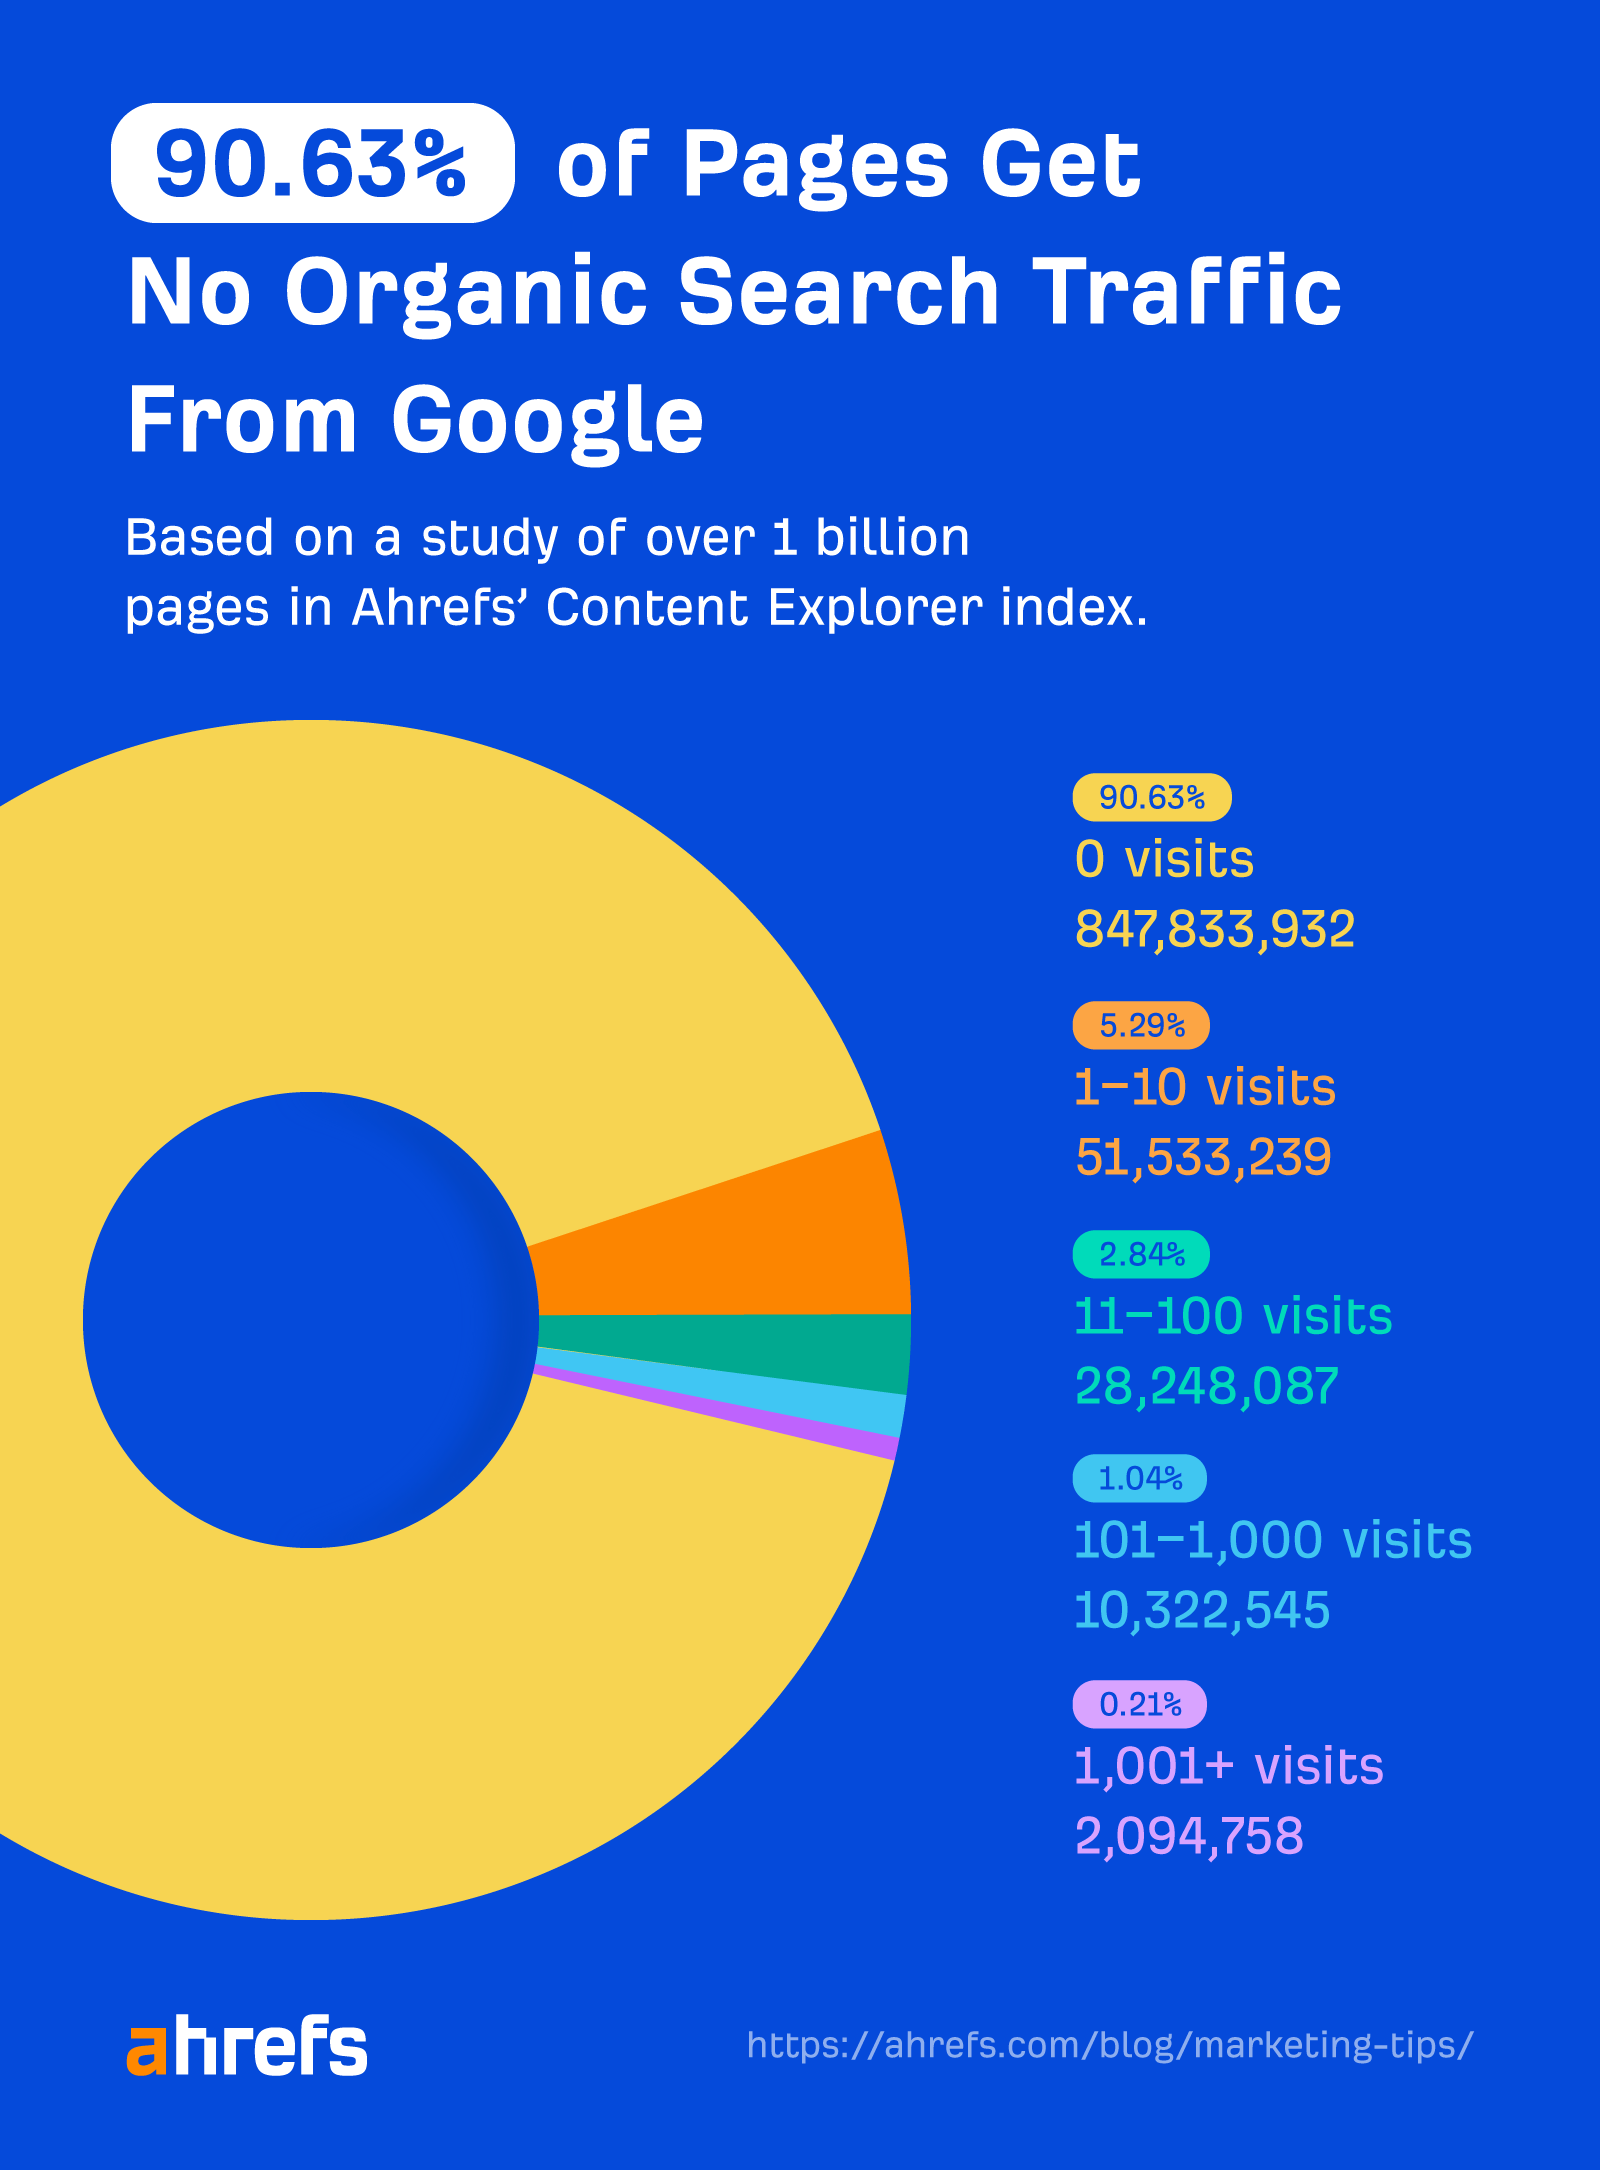 90.63% of pages get no traffic from Google